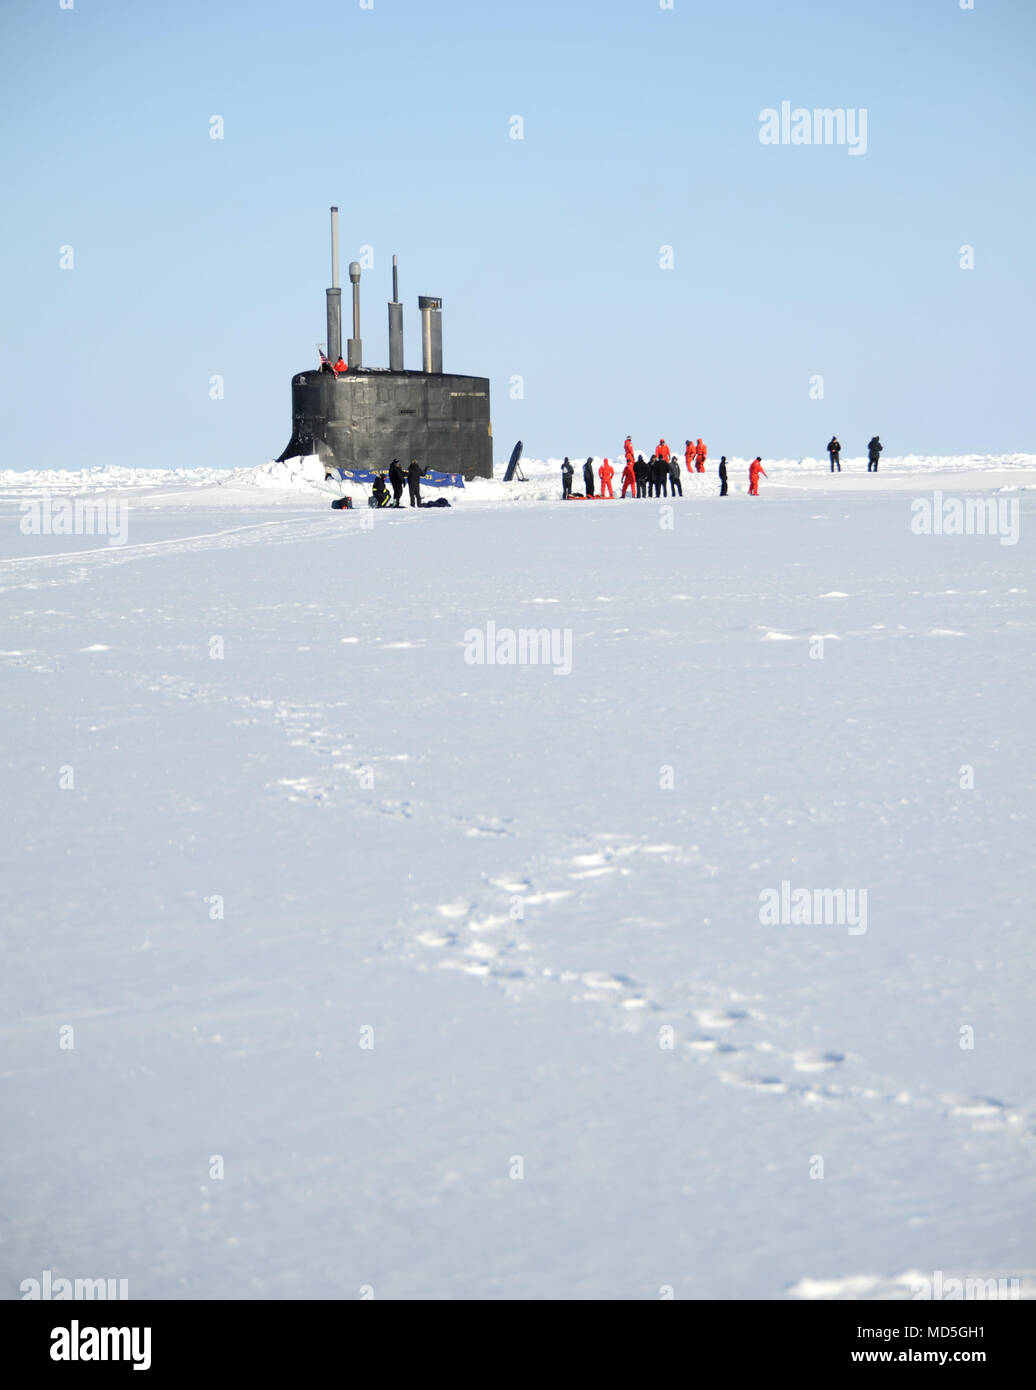 BEAUFORT SEA (March 21, 2018) Sailors of the Seawolf-class fast-attack submarine USS Connecticut (SSN 22) enjoy a breath of fresh air and a walk after surfacing through the ice during the multinational maritime Ice Exercise (ICEX) in the Arctic Circle. ICEX 2018 is a five-week exercise that allows the Navy to assess its operational readiness in the Arctic, increase experience in the region, advance understanding of the Arctic environment, and continue to develop relationships with other services, allies and partner organizations. (U.S. Navy photo by Chief Darryl I. Wood/Released) Stock Photo